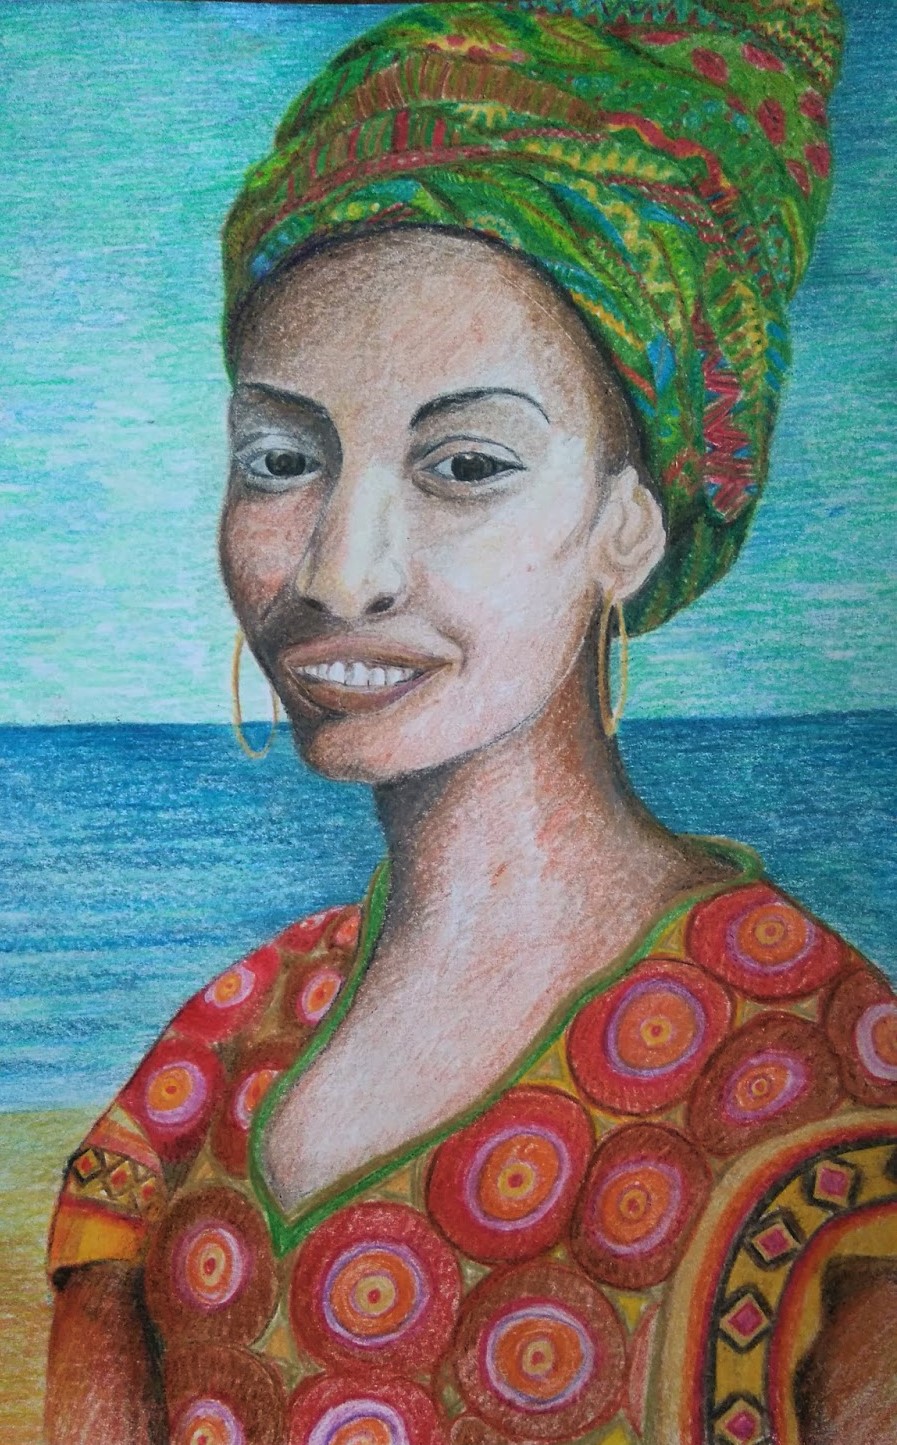 Woman from Gambia